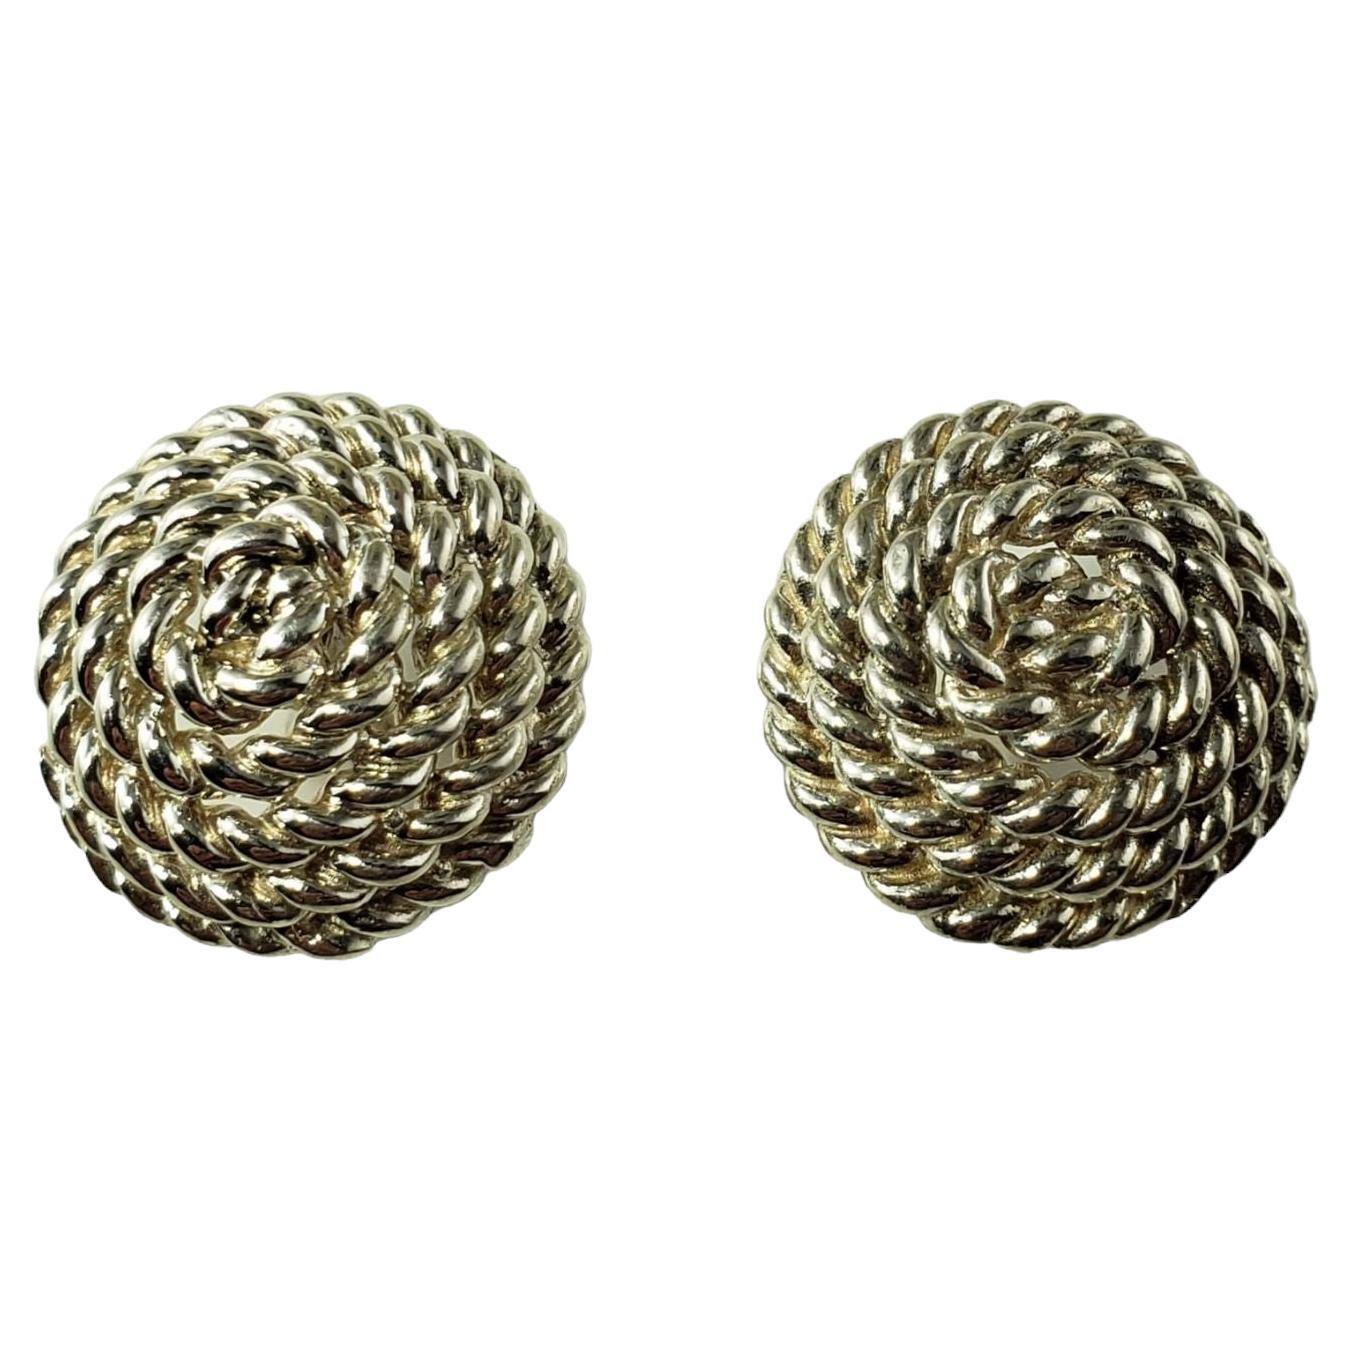 Tiffany & Co. Sterling Silver Rope Spiral Earrings